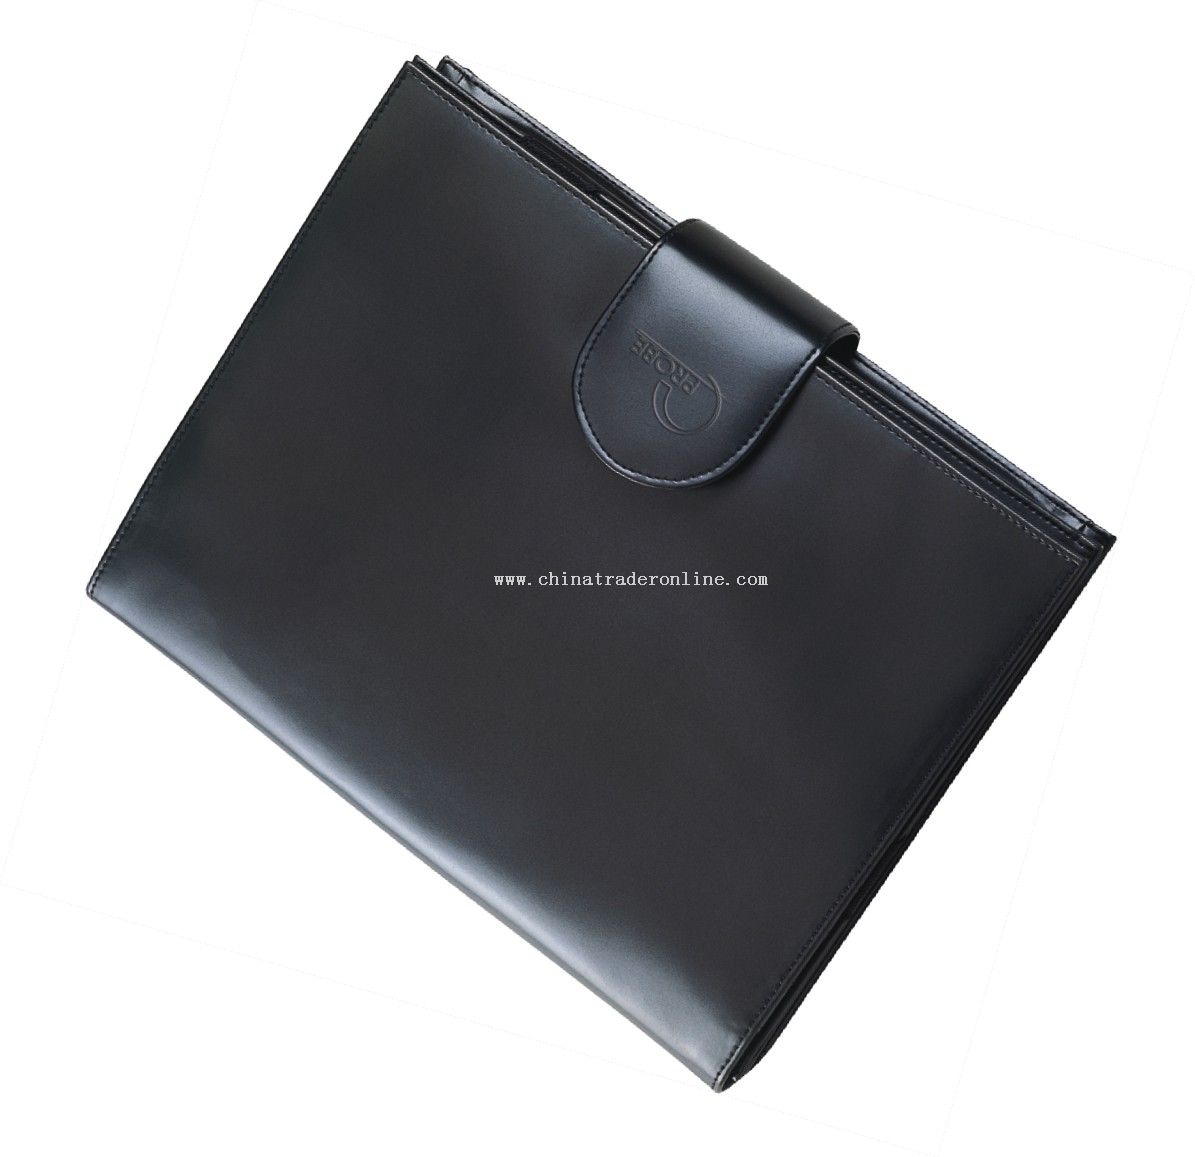 Executive underarm computer bag for laptop computer and documents. from China